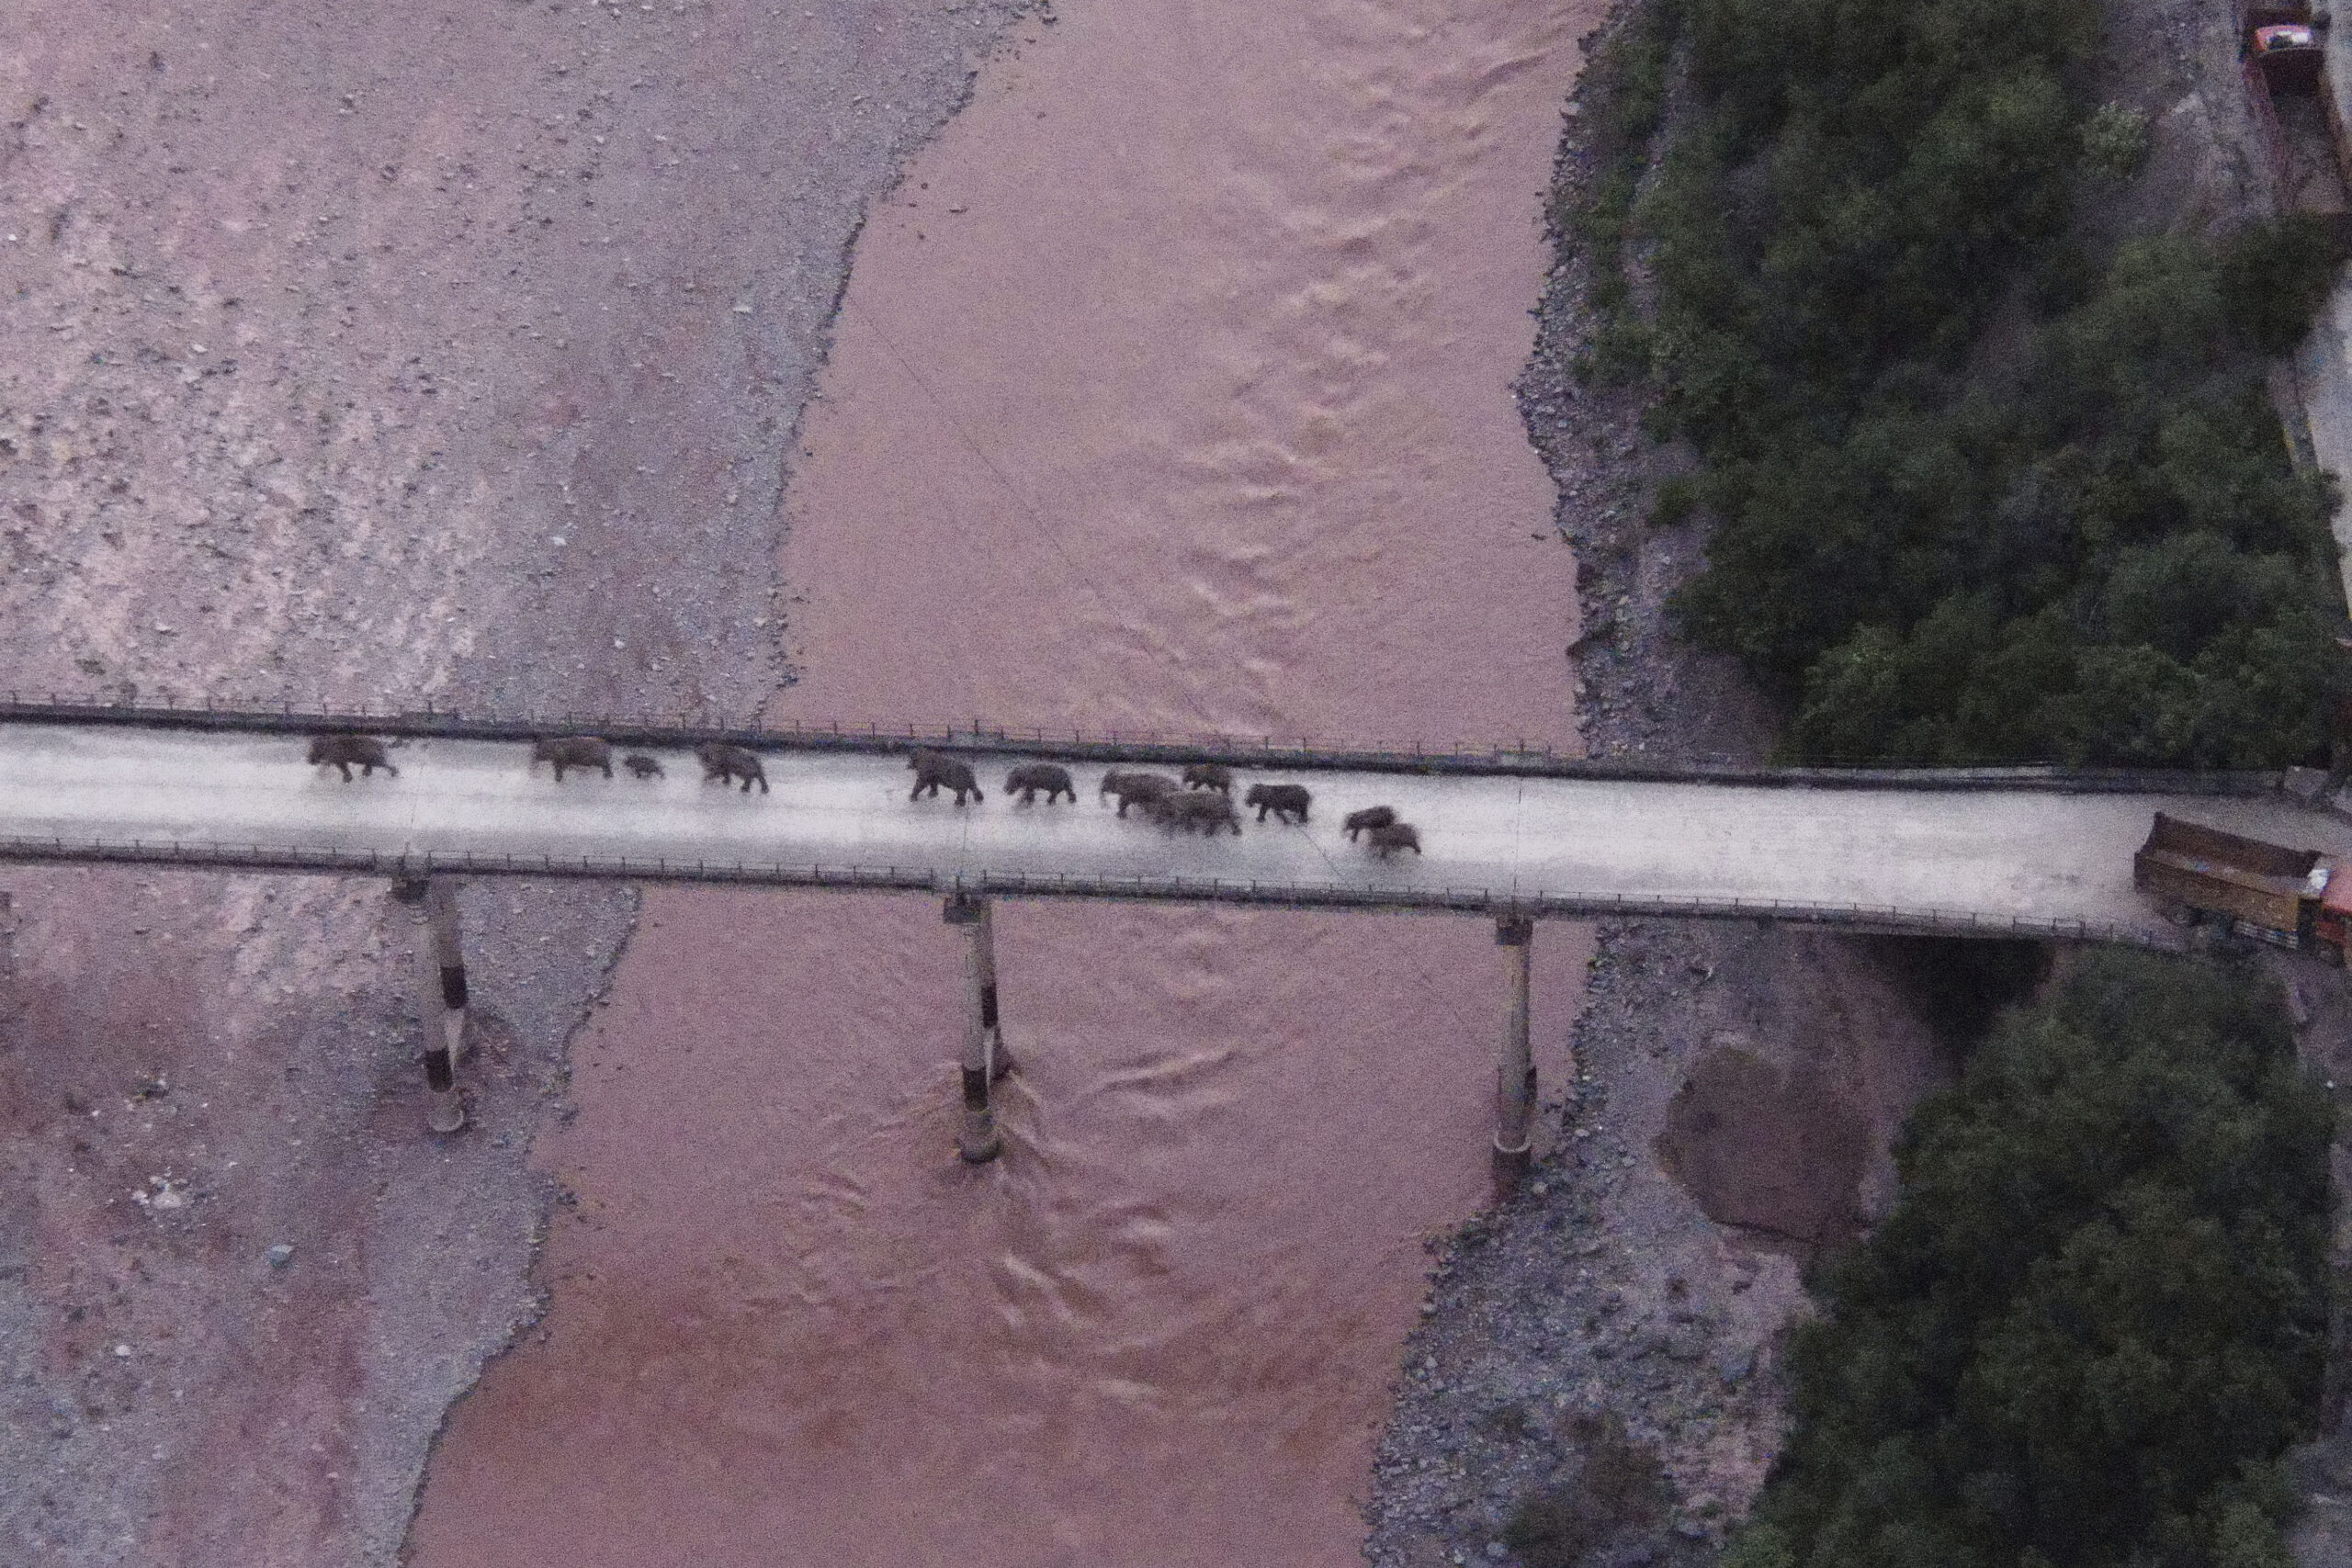 In this photo released by the Yunnan Provincial Command Center for the Safety and Monitoring of North Migrating Asian Elephants, a herd of wandering elephants cross a river using a highway near Yuxi city, Yuanjiang county in southwestern China's Yunnan Province Sunday, Aug. 8, 2021. The 14 elephants of various sizes and ages were guided across the Yuanjiang river in Yunnan province on Sunday night and a path is being opened for them to return to the nature reserve in the Xishuangbanna Dai Autonomous Prefecture. (Yunnan Provincial Command Center for the Safety and Monitoring of North Migrating Asian Elephants via AP)